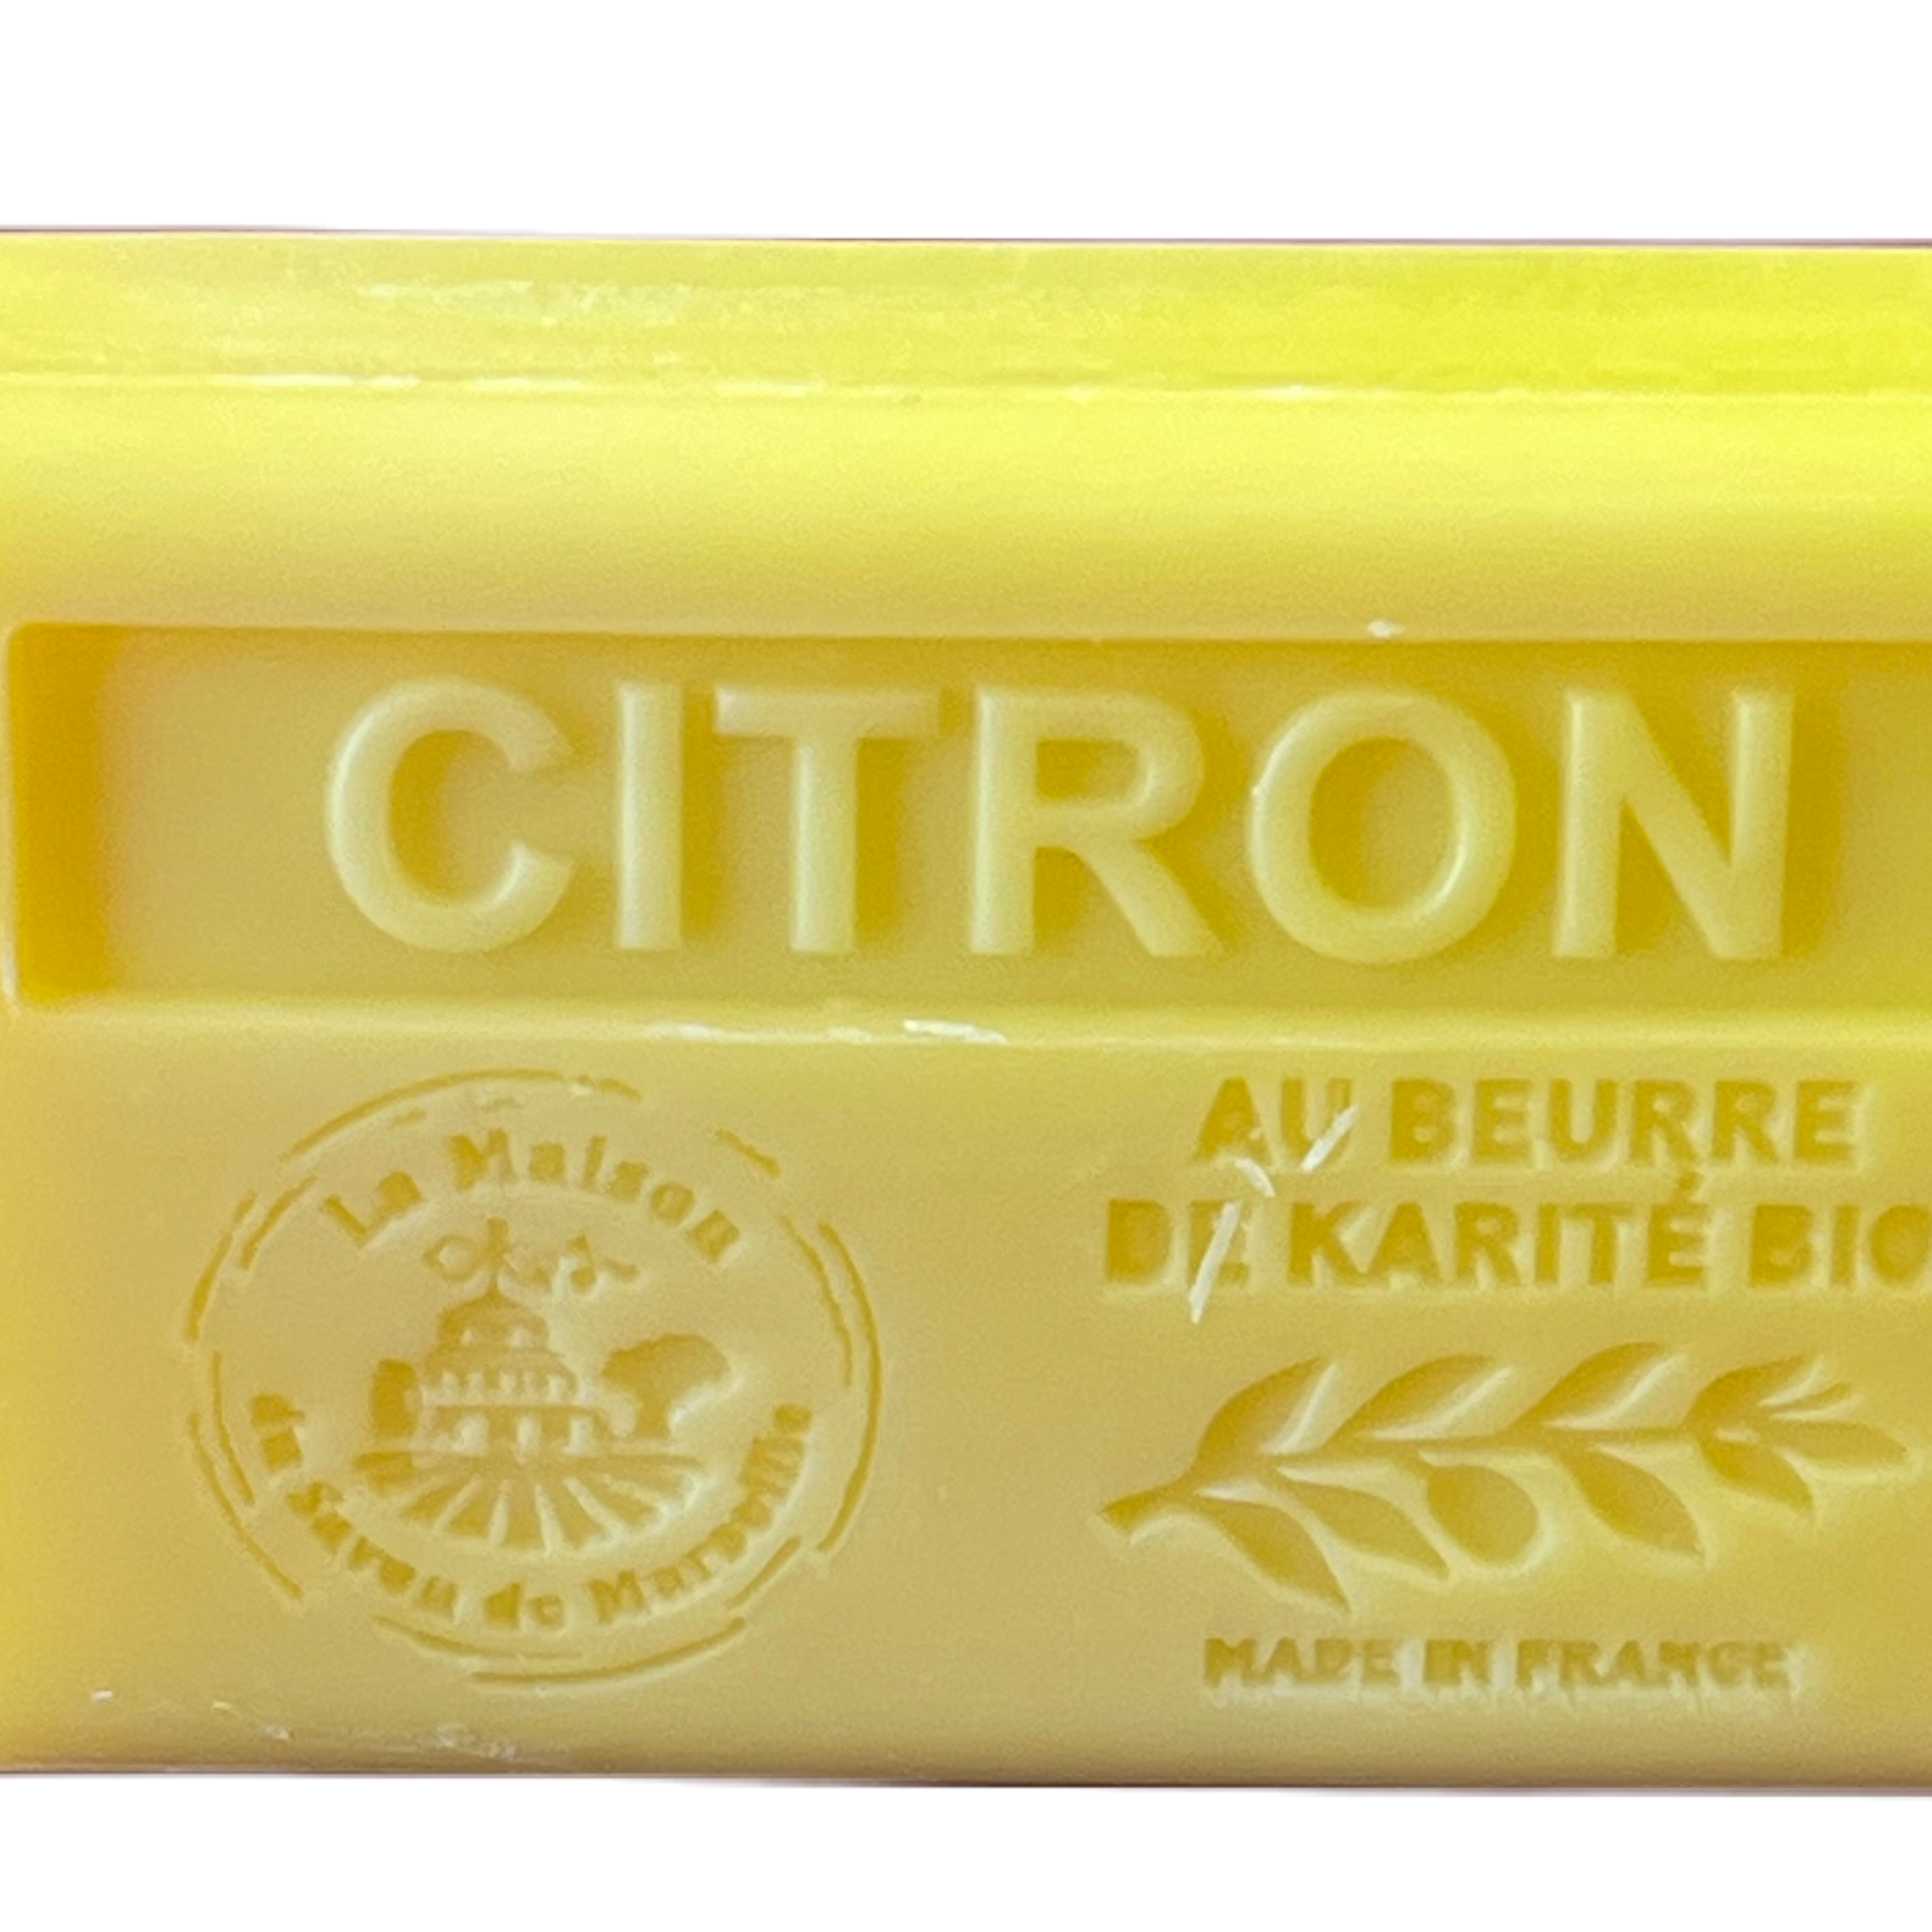 Citron, French Soap with Organic Shea Butter, 125g